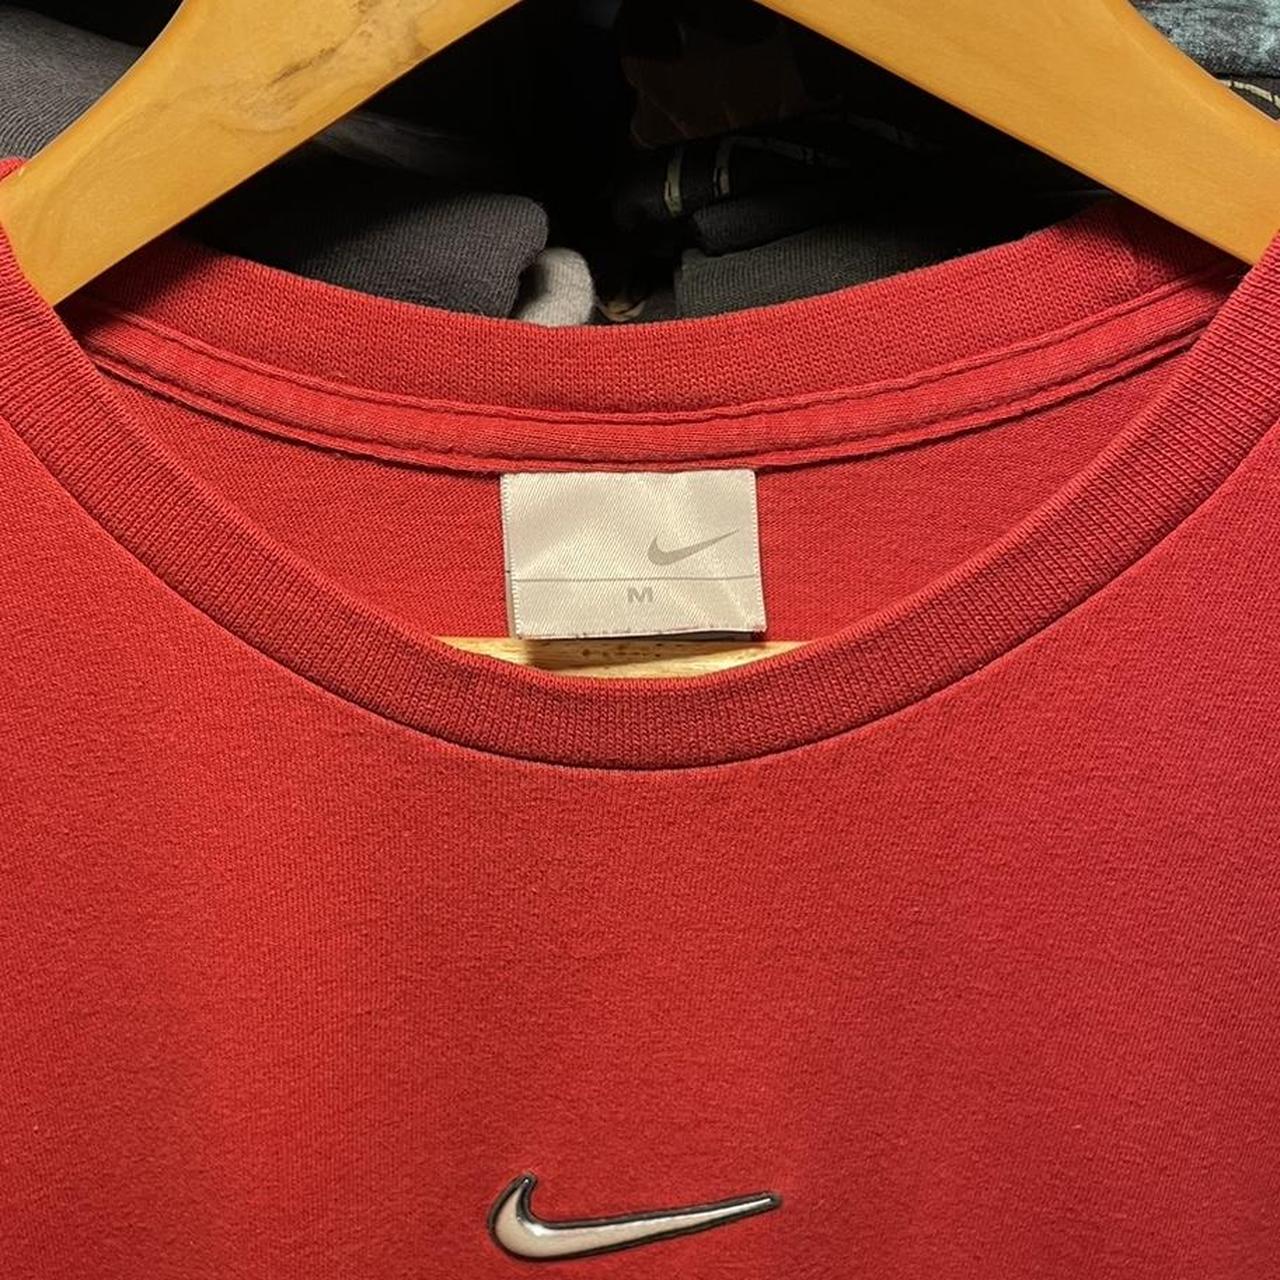 Nike Men's Red and Silver T-shirt | Depop